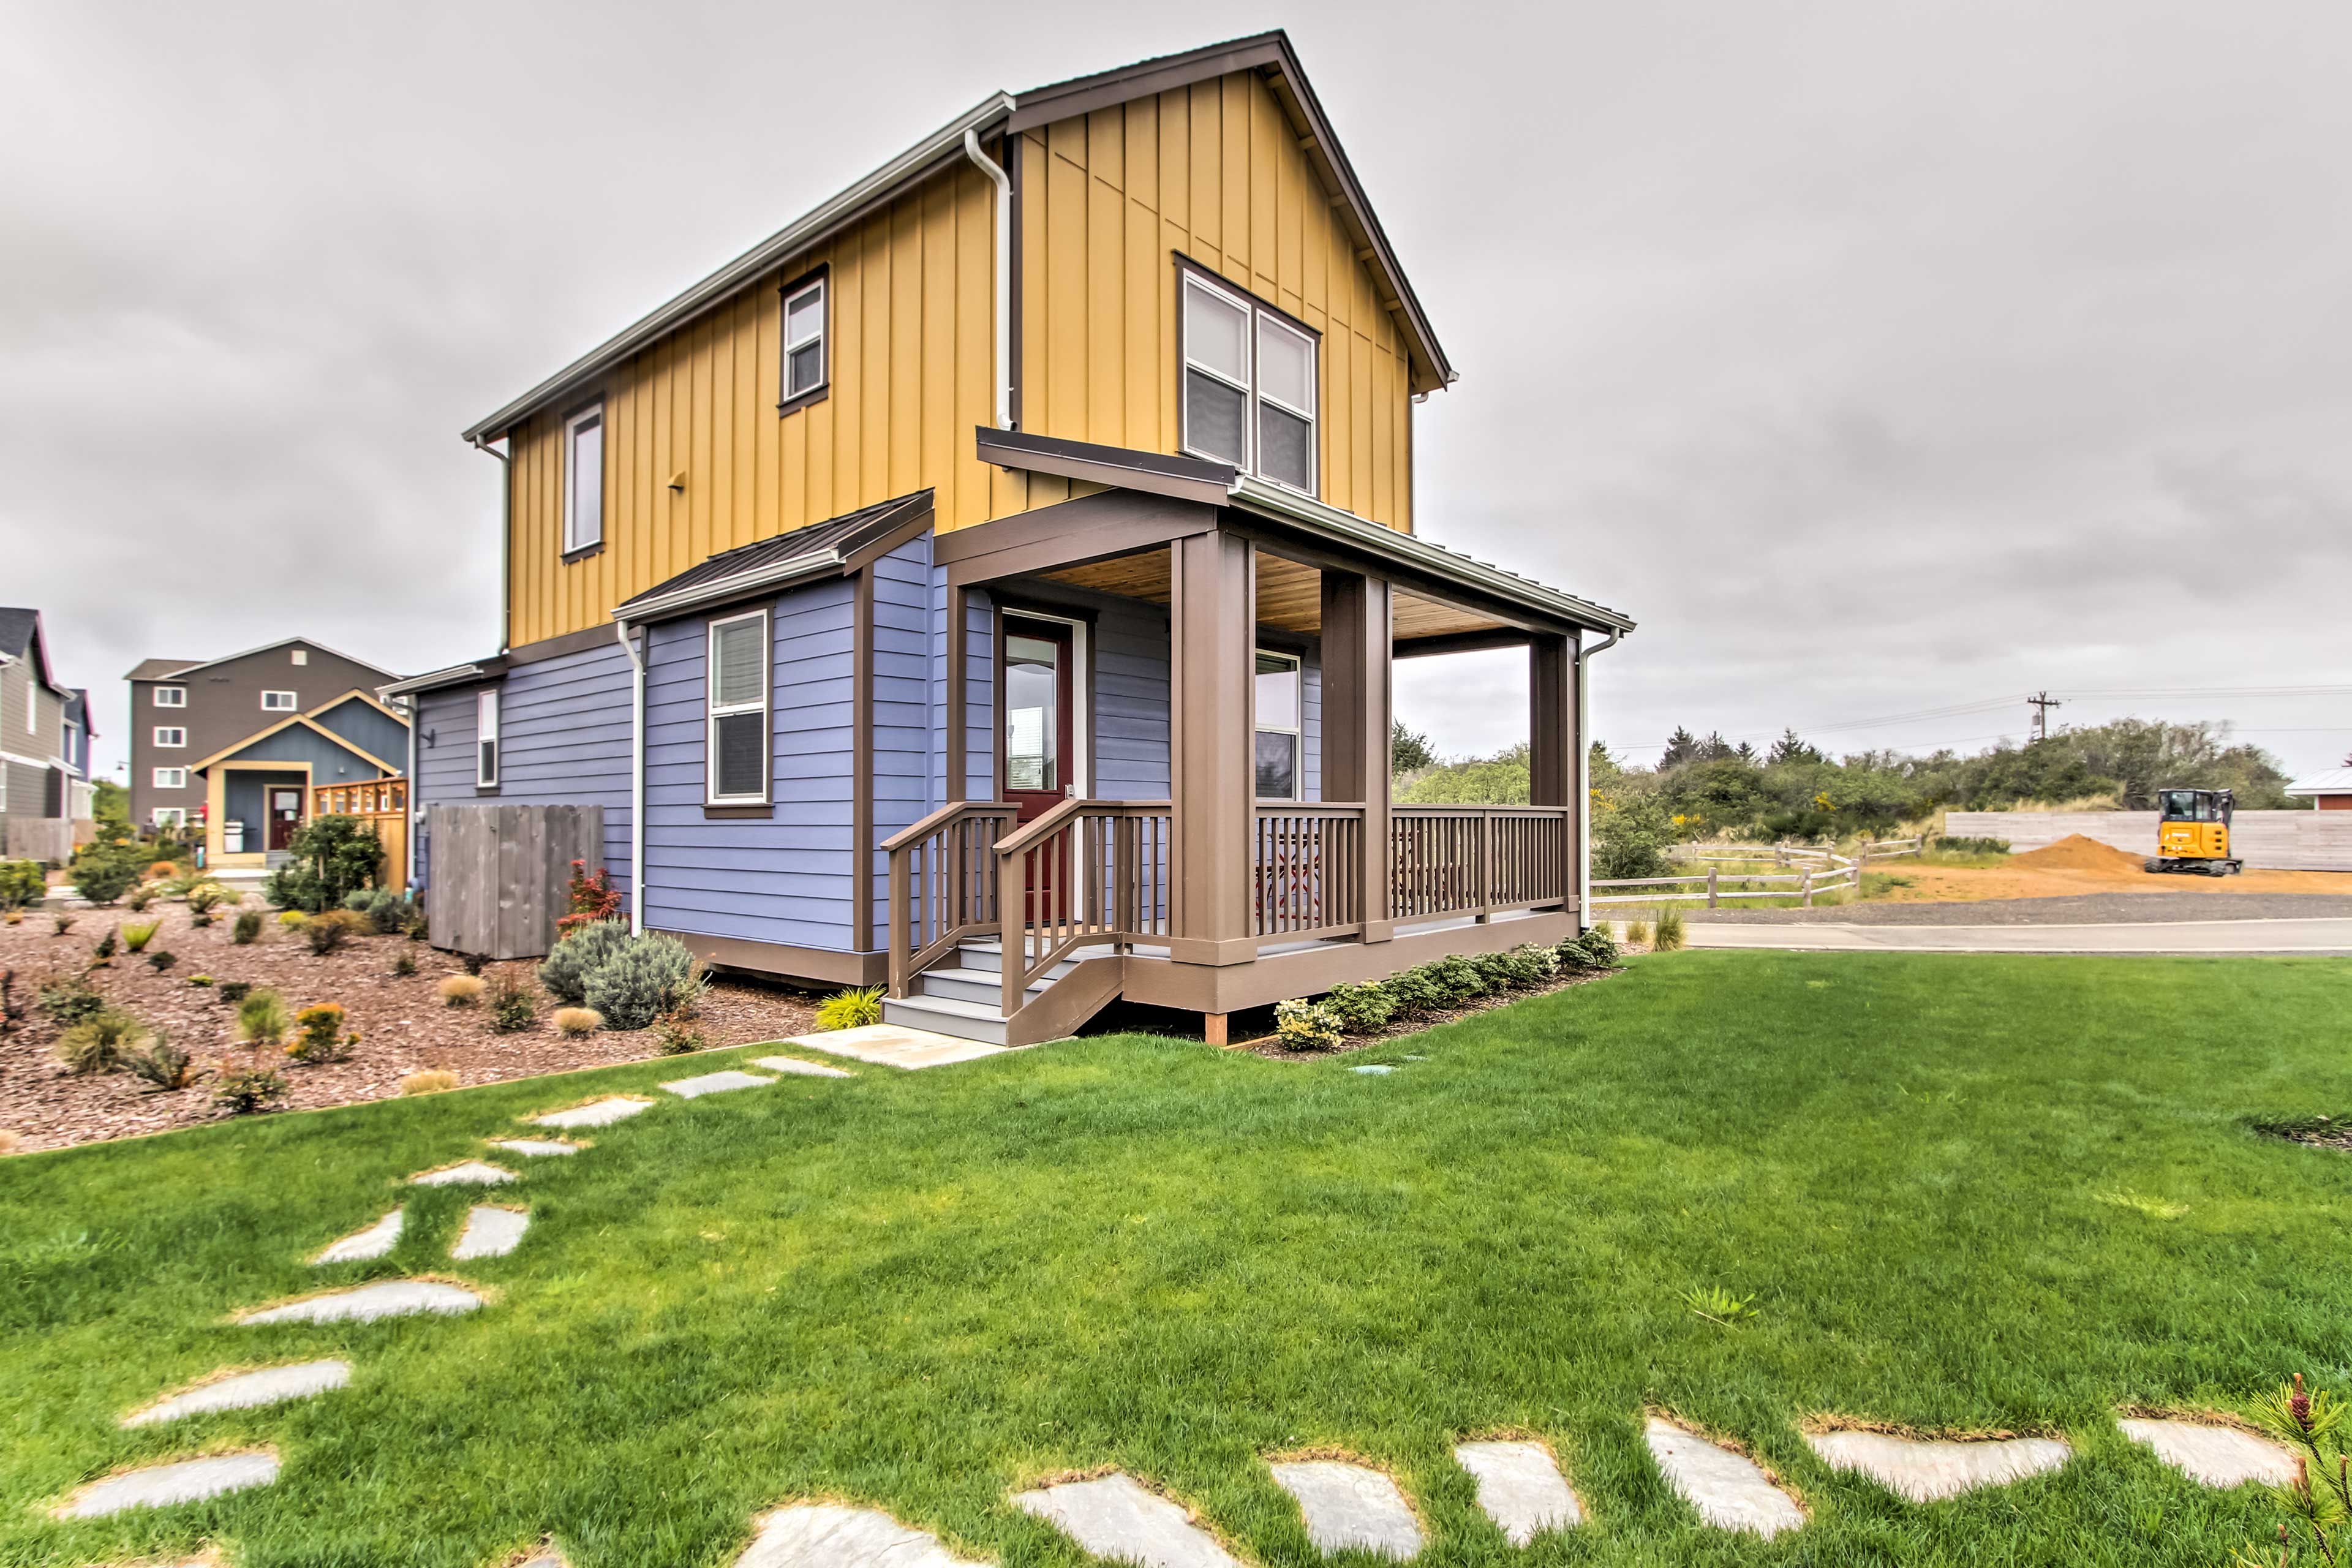 Ocean Shores Vacation Rental | 2BR | 2.5BA | 1,130 Sq Ft | 3 Stairs Required